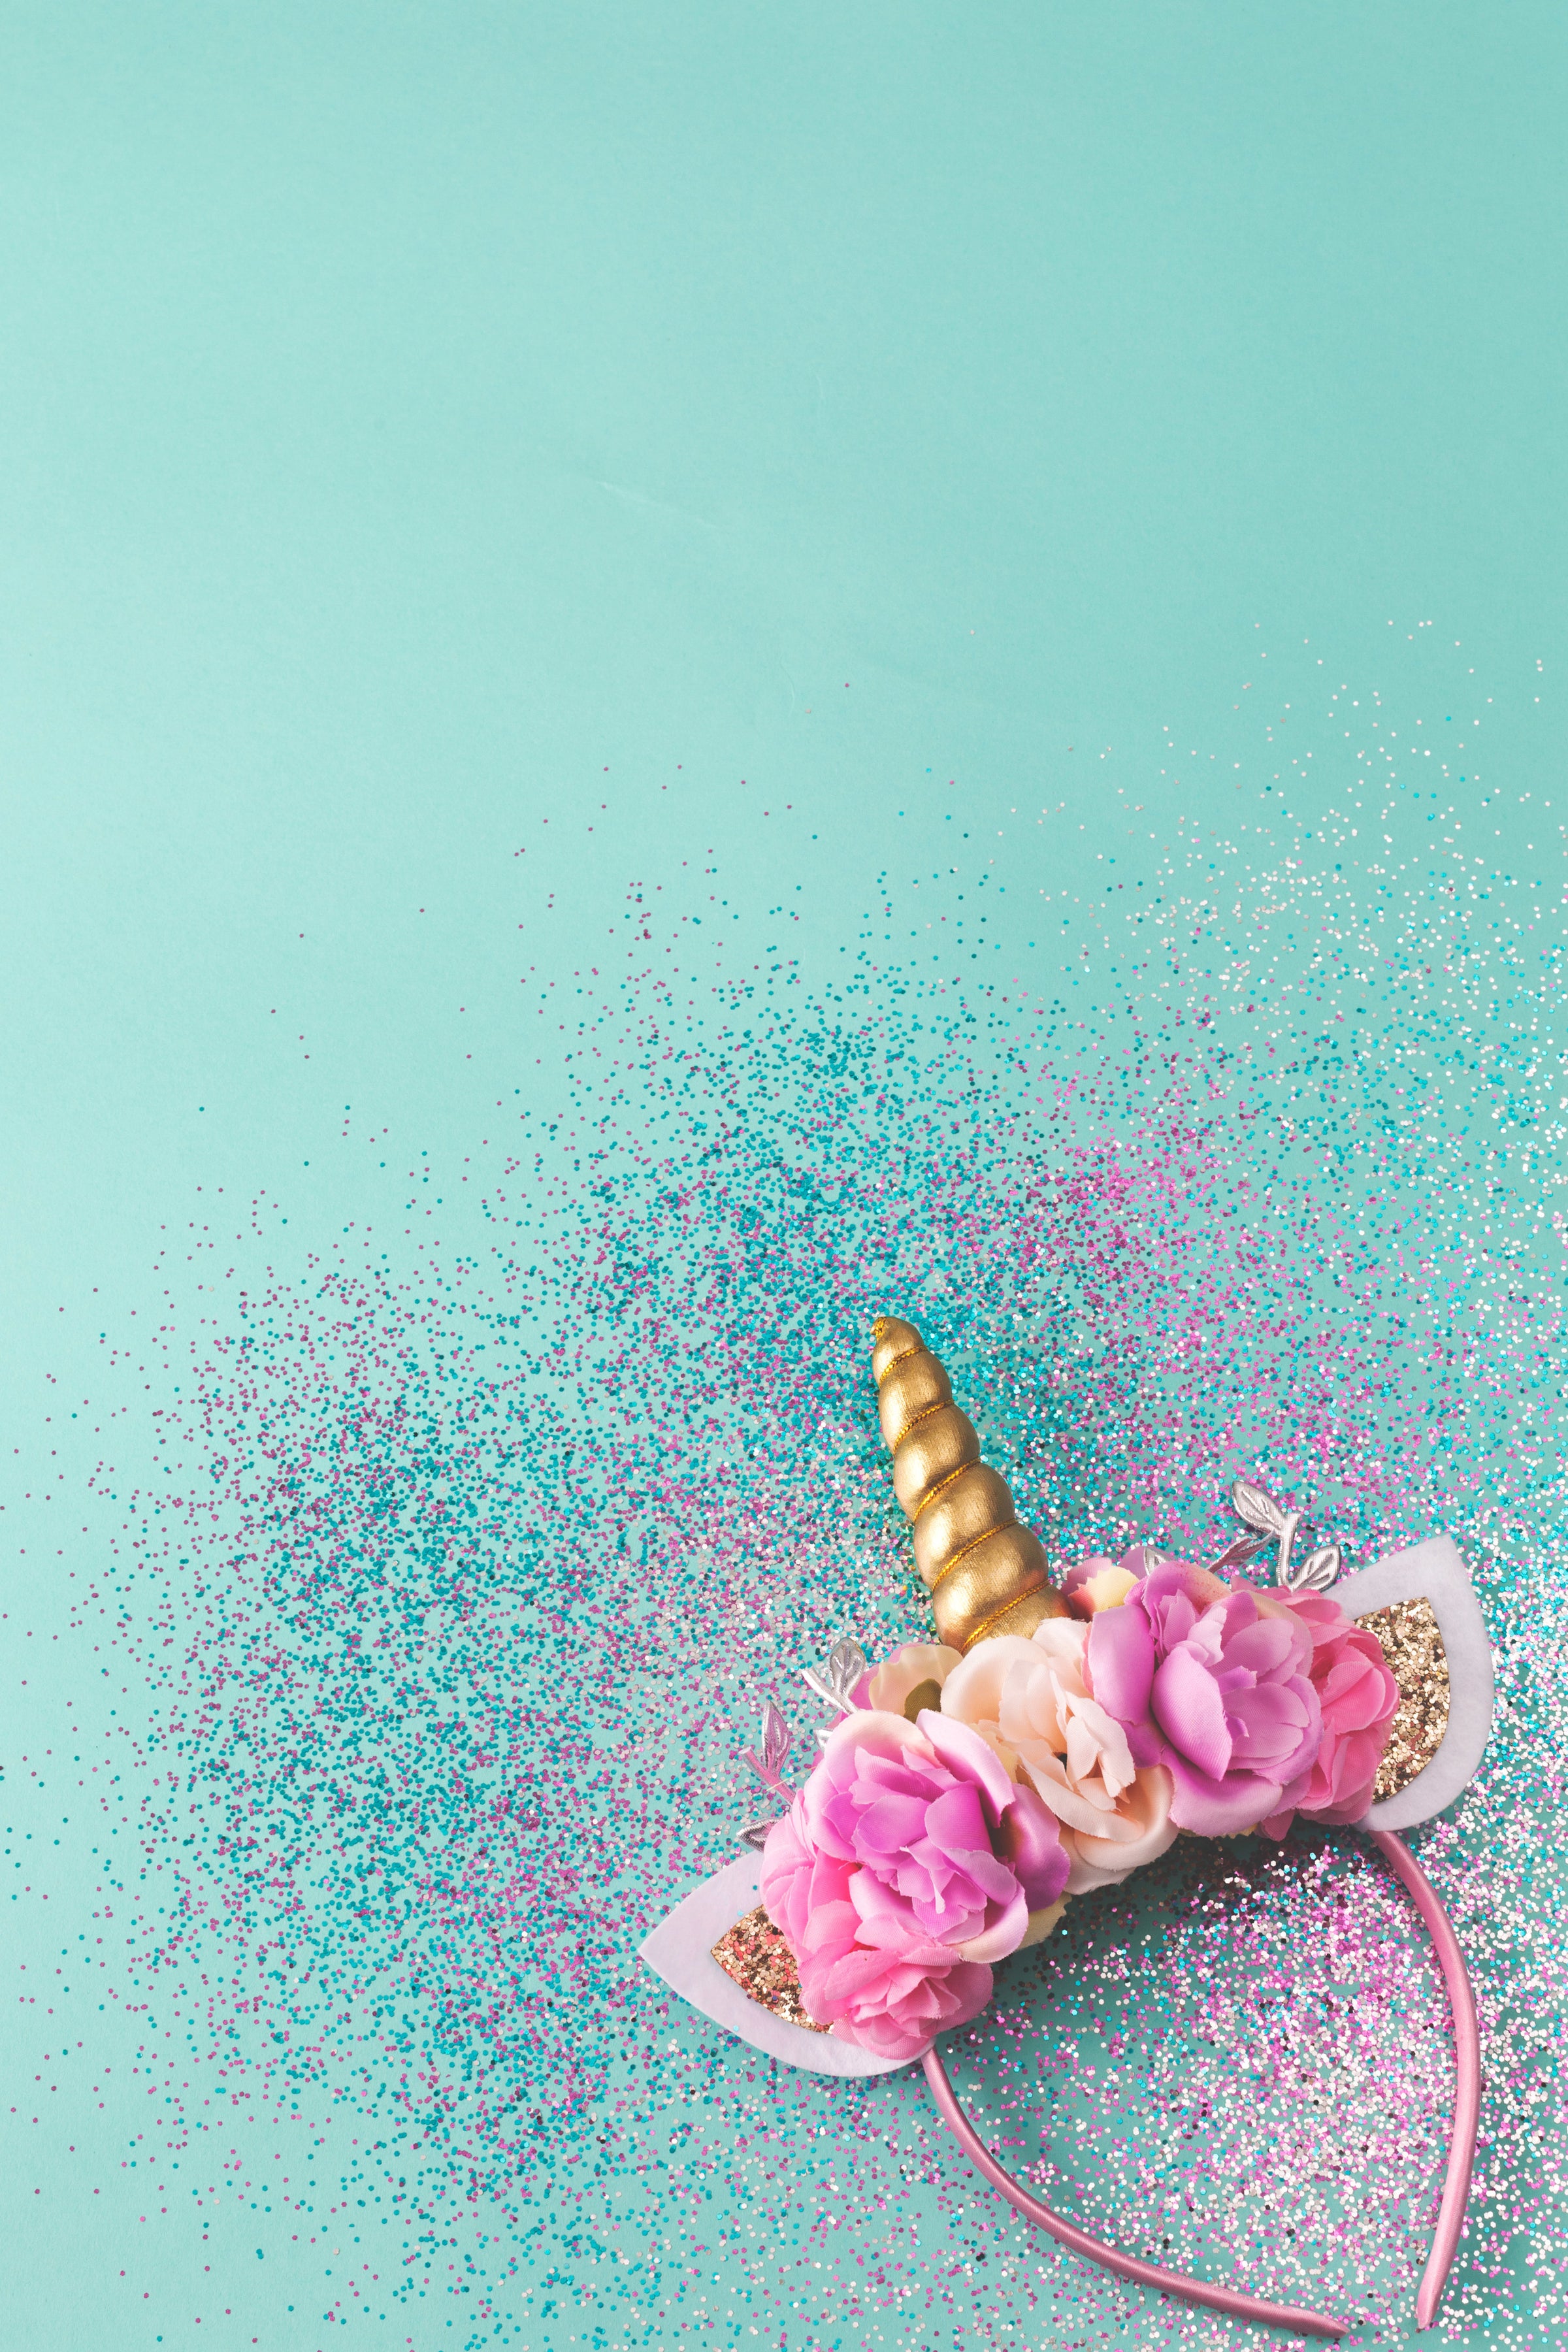 Turquoise background with glitter sprinkled over it and a unicorn headband